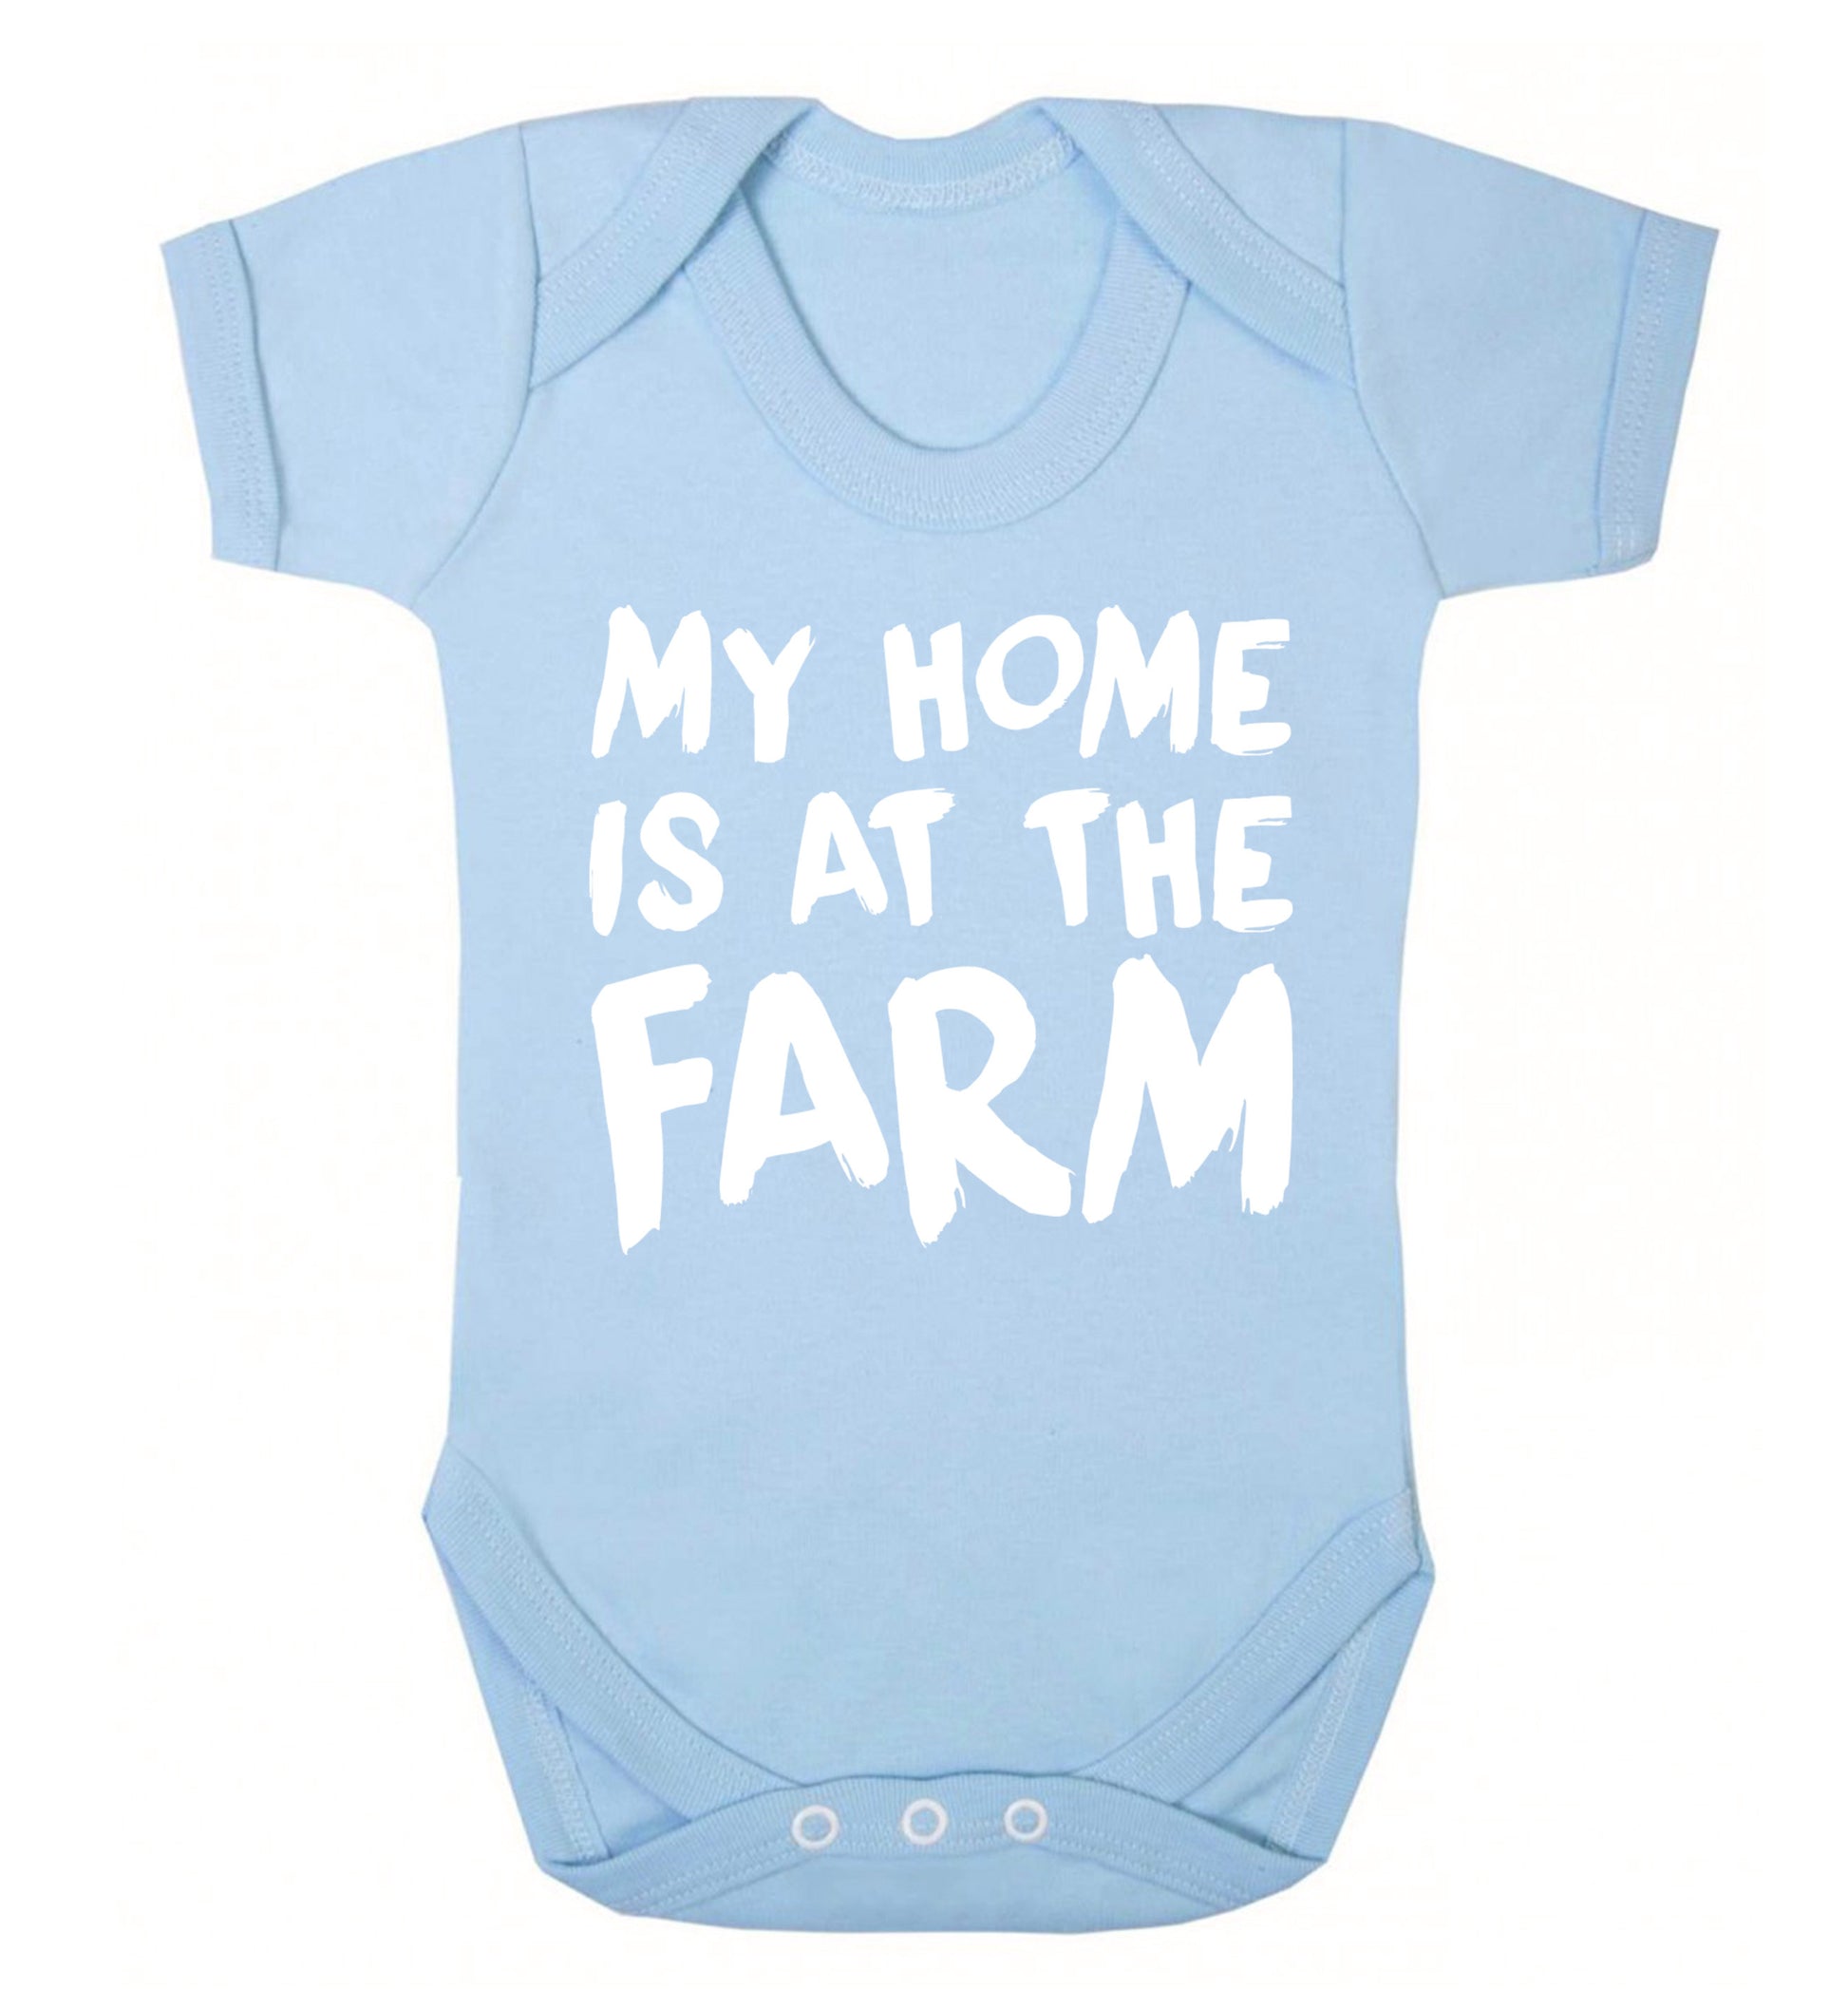 My home is at the farm Baby Vest pale blue 18-24 months